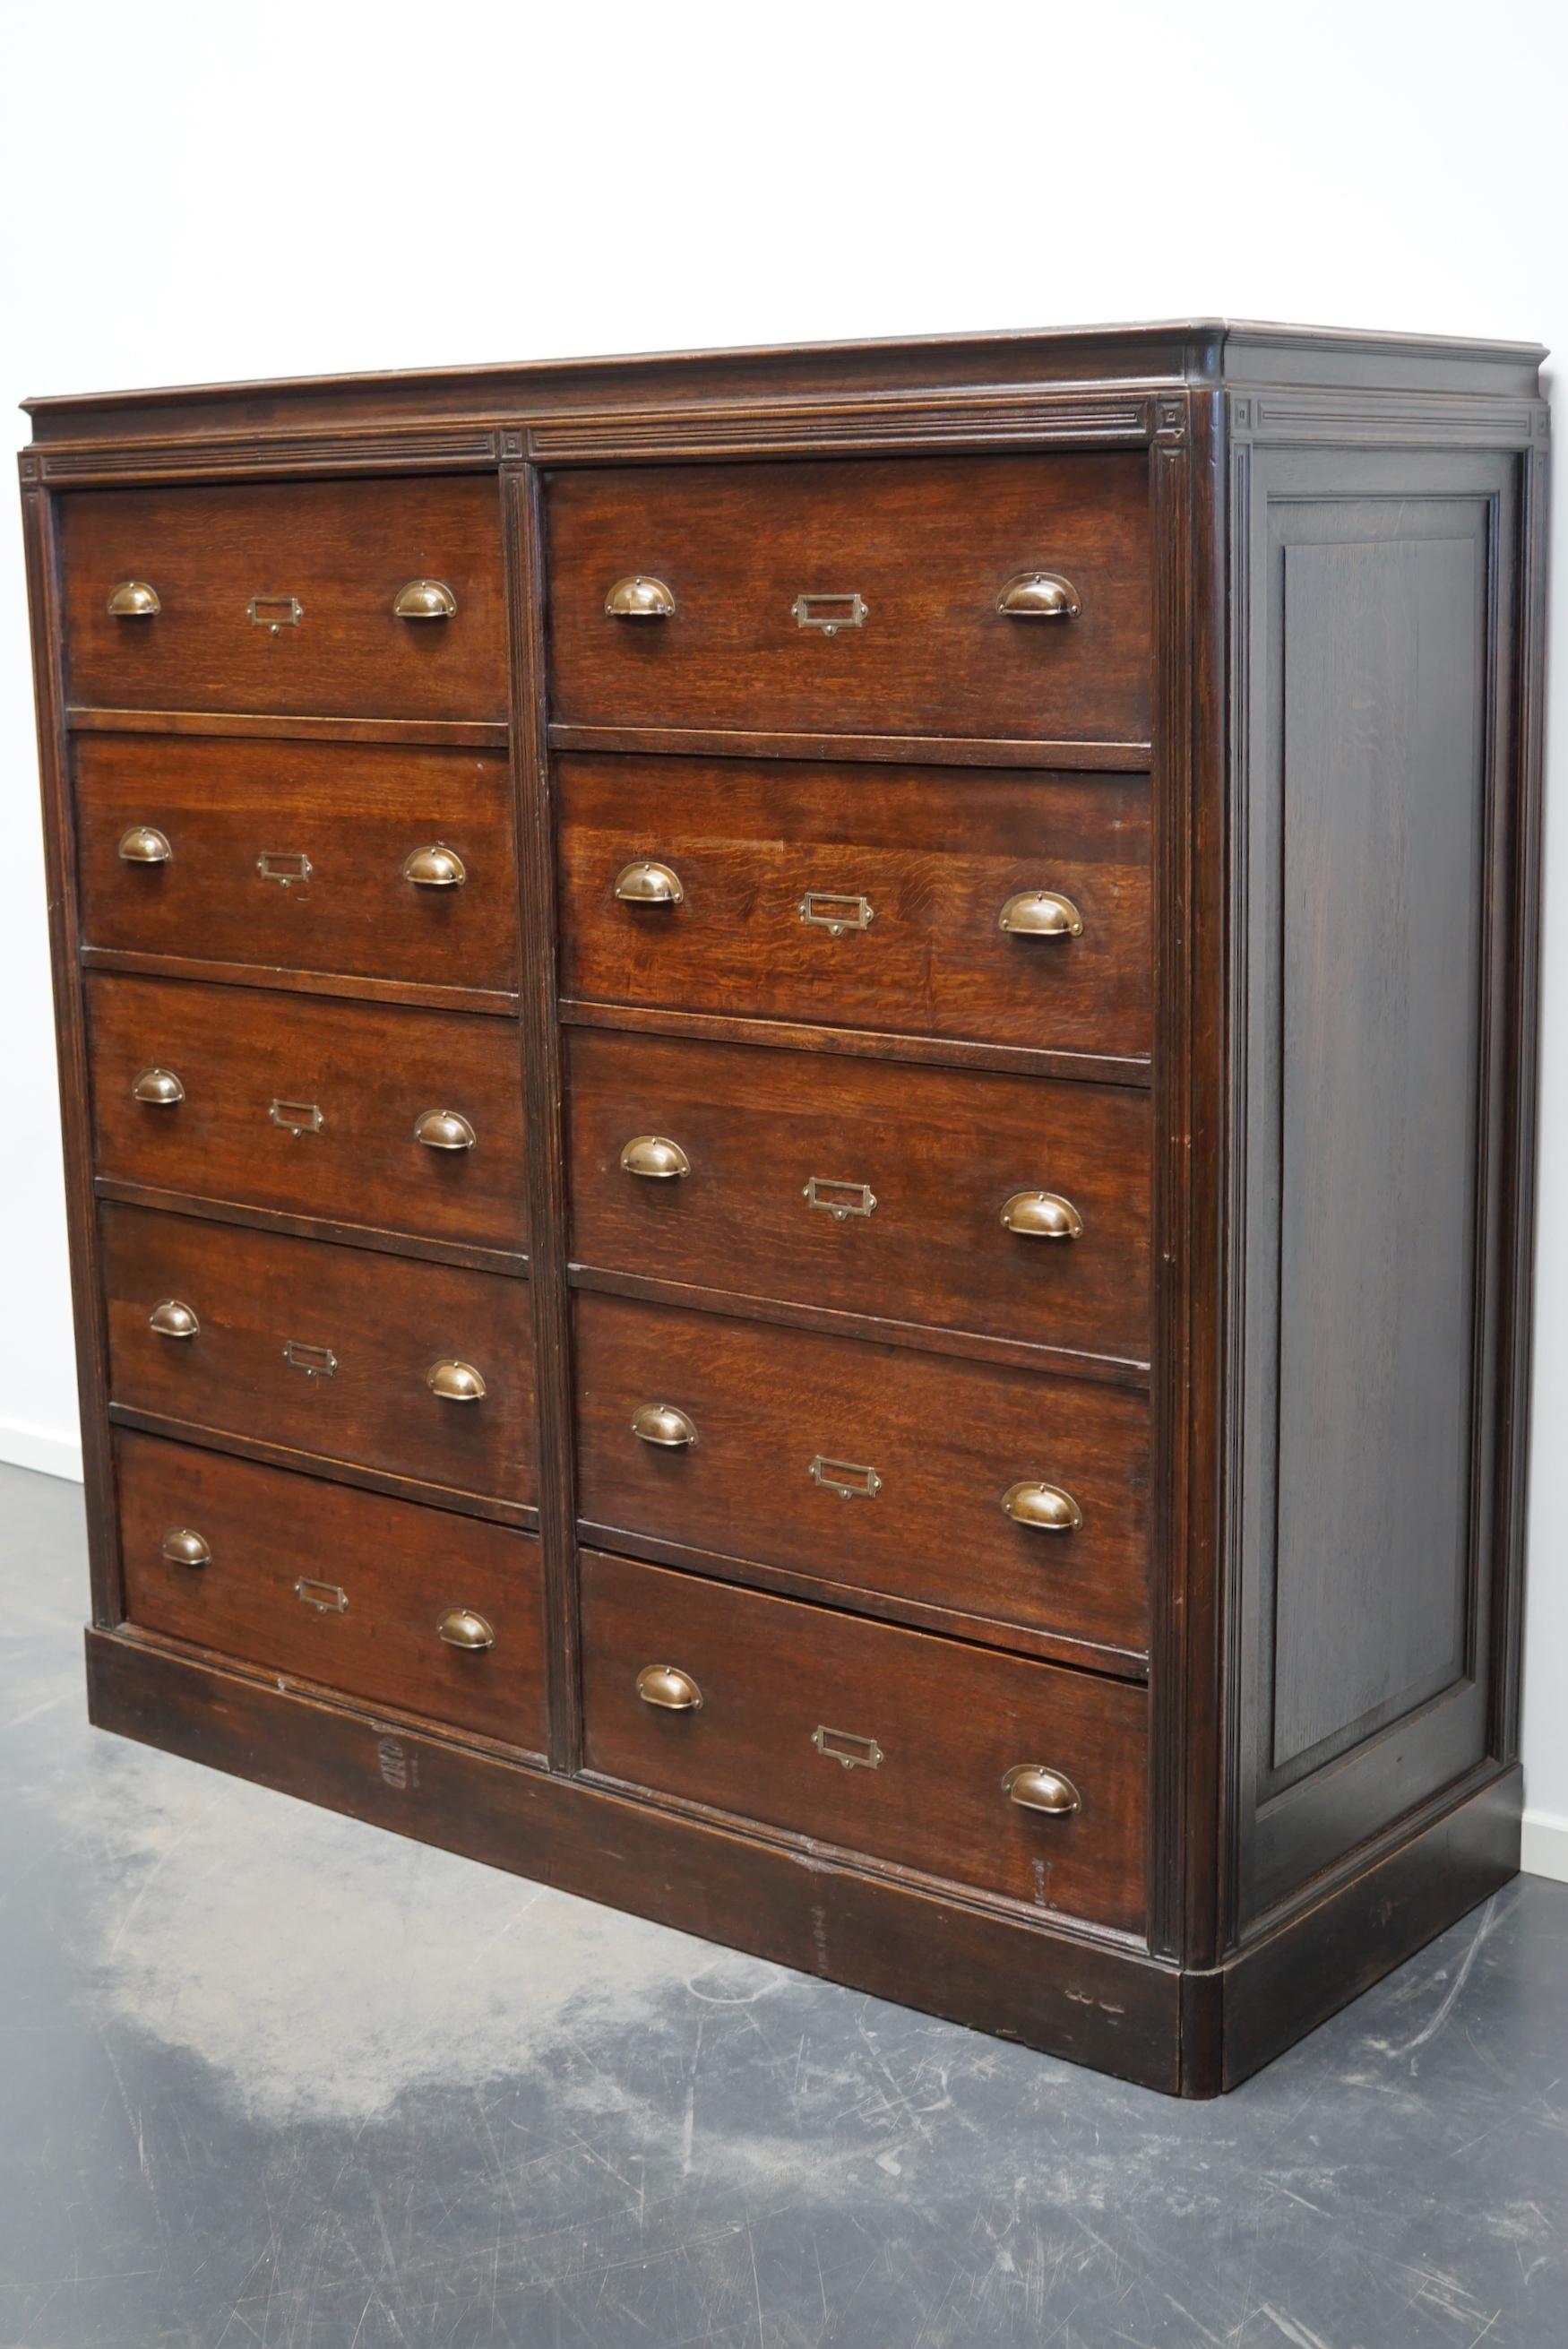 This oak apothecary cabinet with brass hardware was made in the early 20th century in France and was used to store sewing patterns. It is very well made and it remains in a good condition. The large drawers make it a very functional cabinet. The